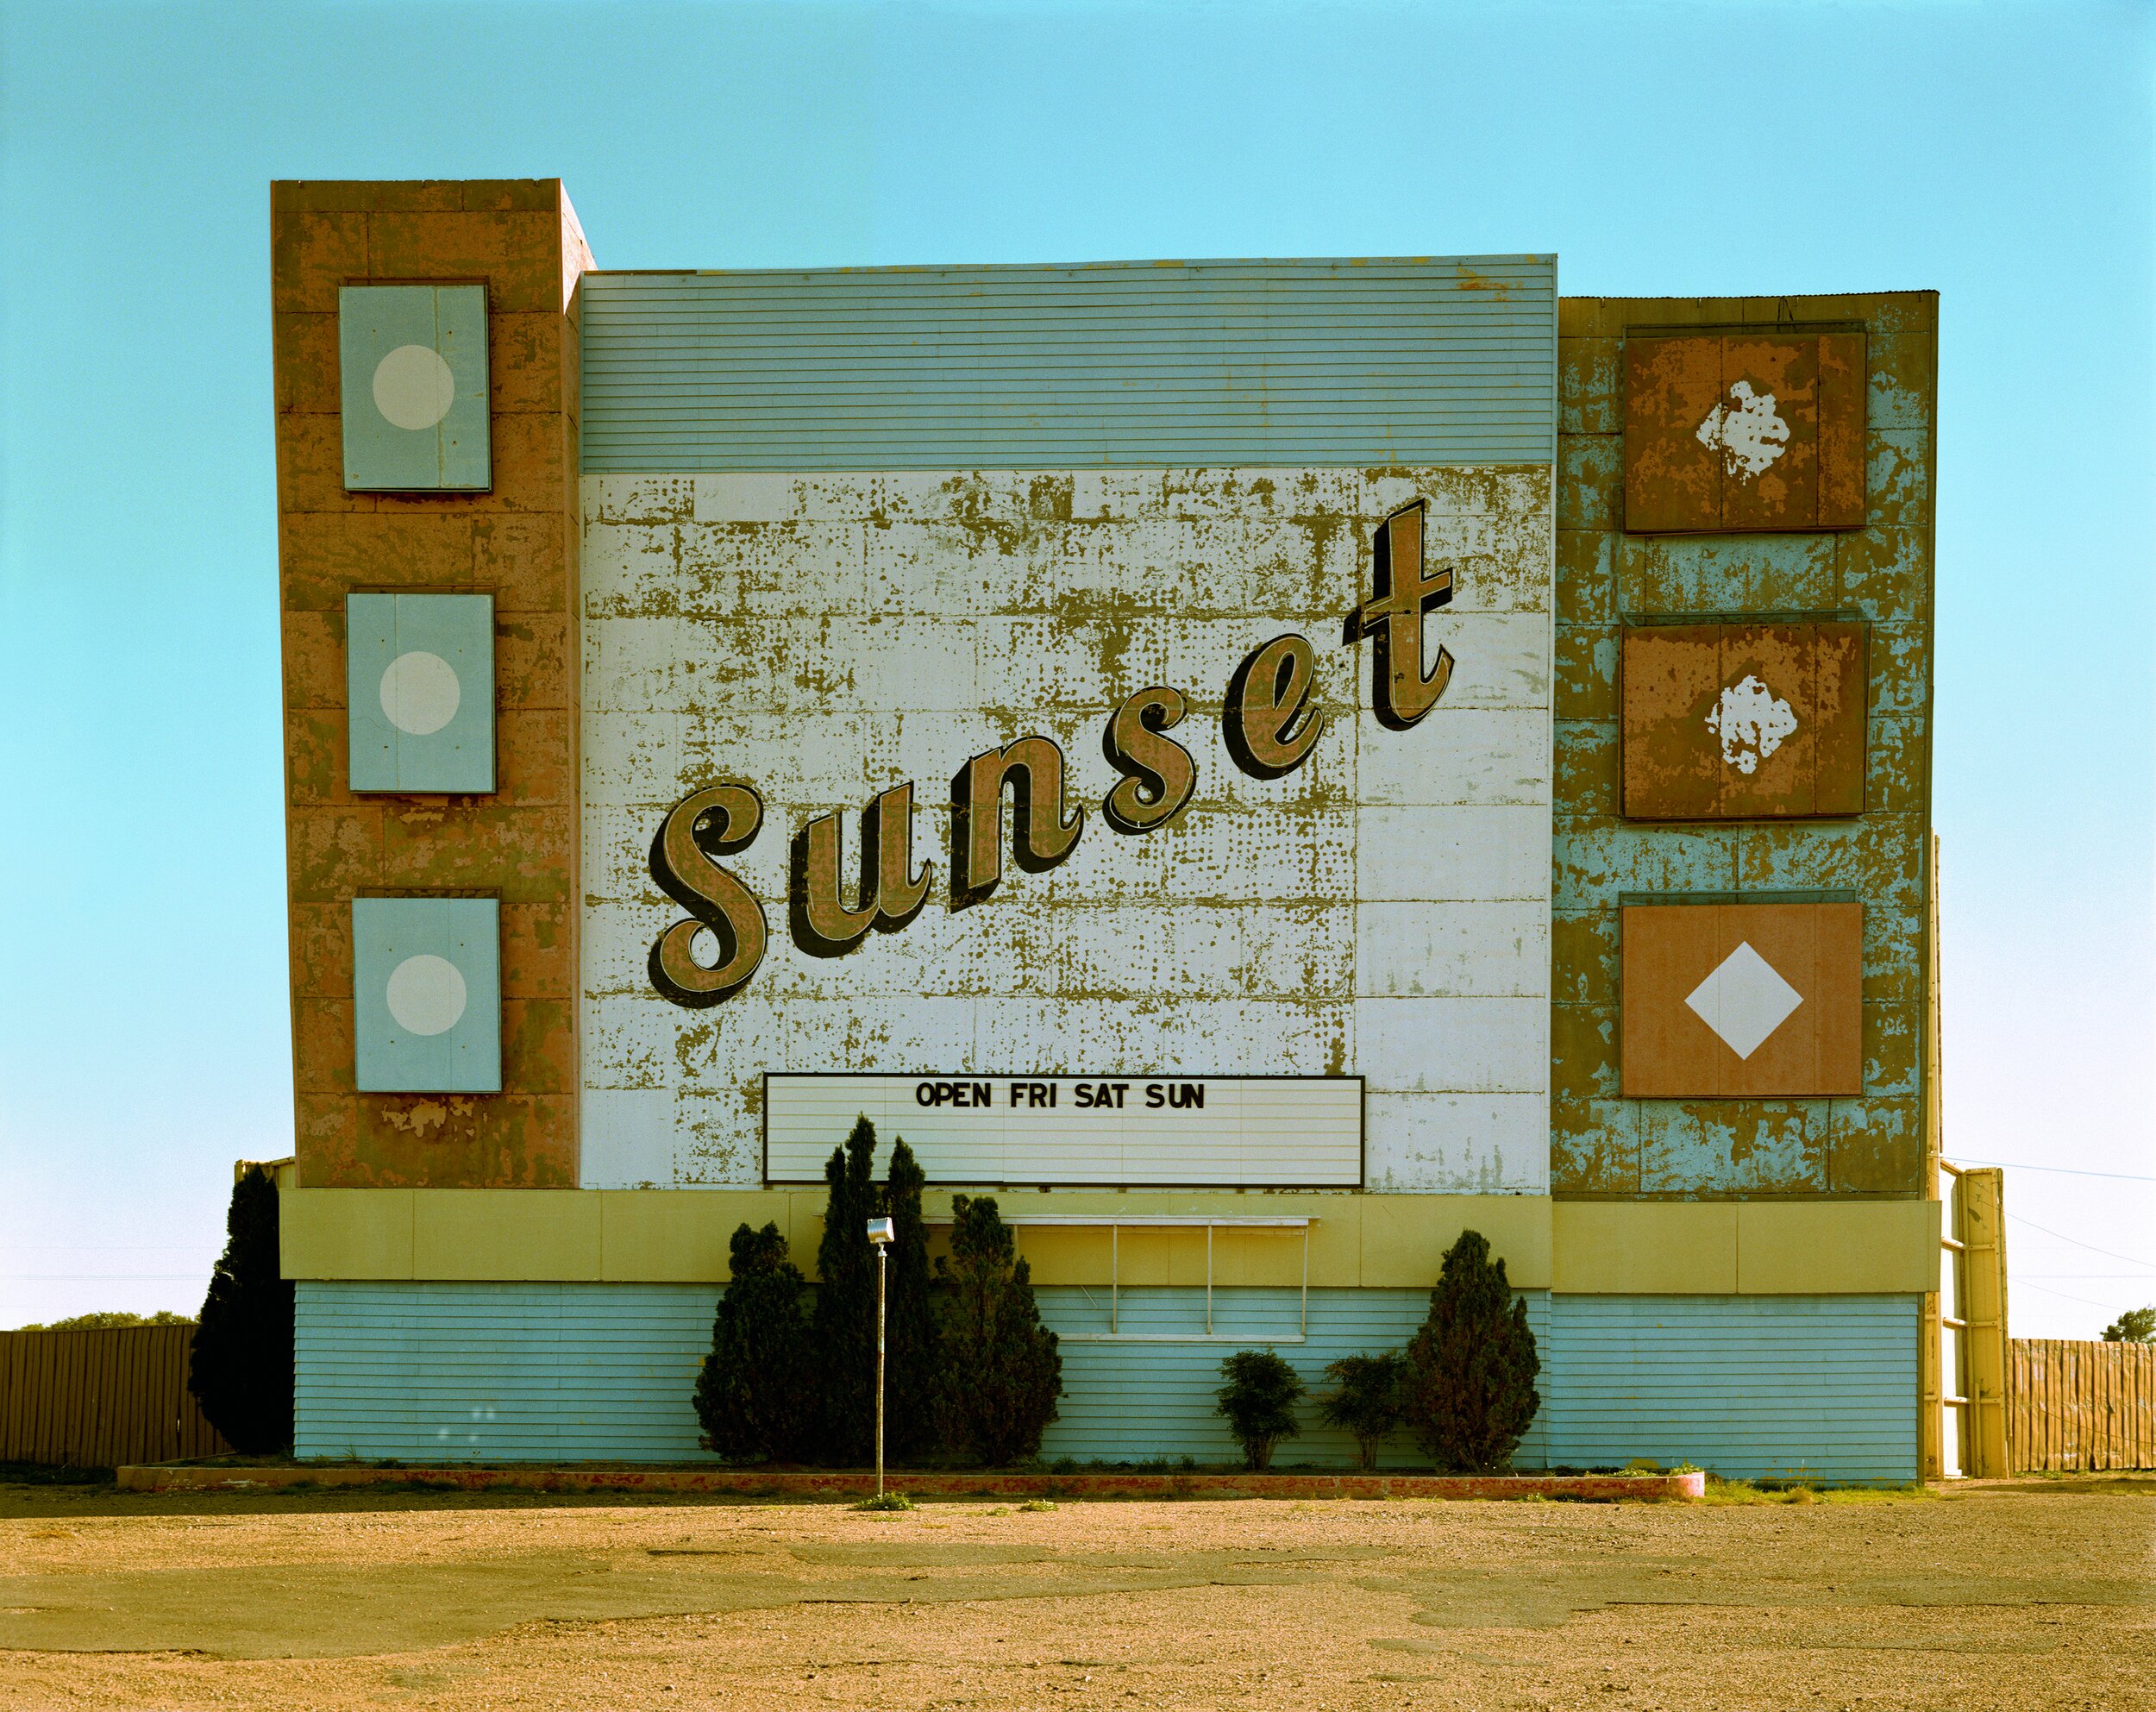   STEPHEN SHORE,  (American, b. 1947),  Sunset Drive In, West 9th Avenue, Amarillo, Texas, &nbsp;1974, C- print, 14 x 16 ½, Gift of Phillip Periman in memory of Wendy Marsh 